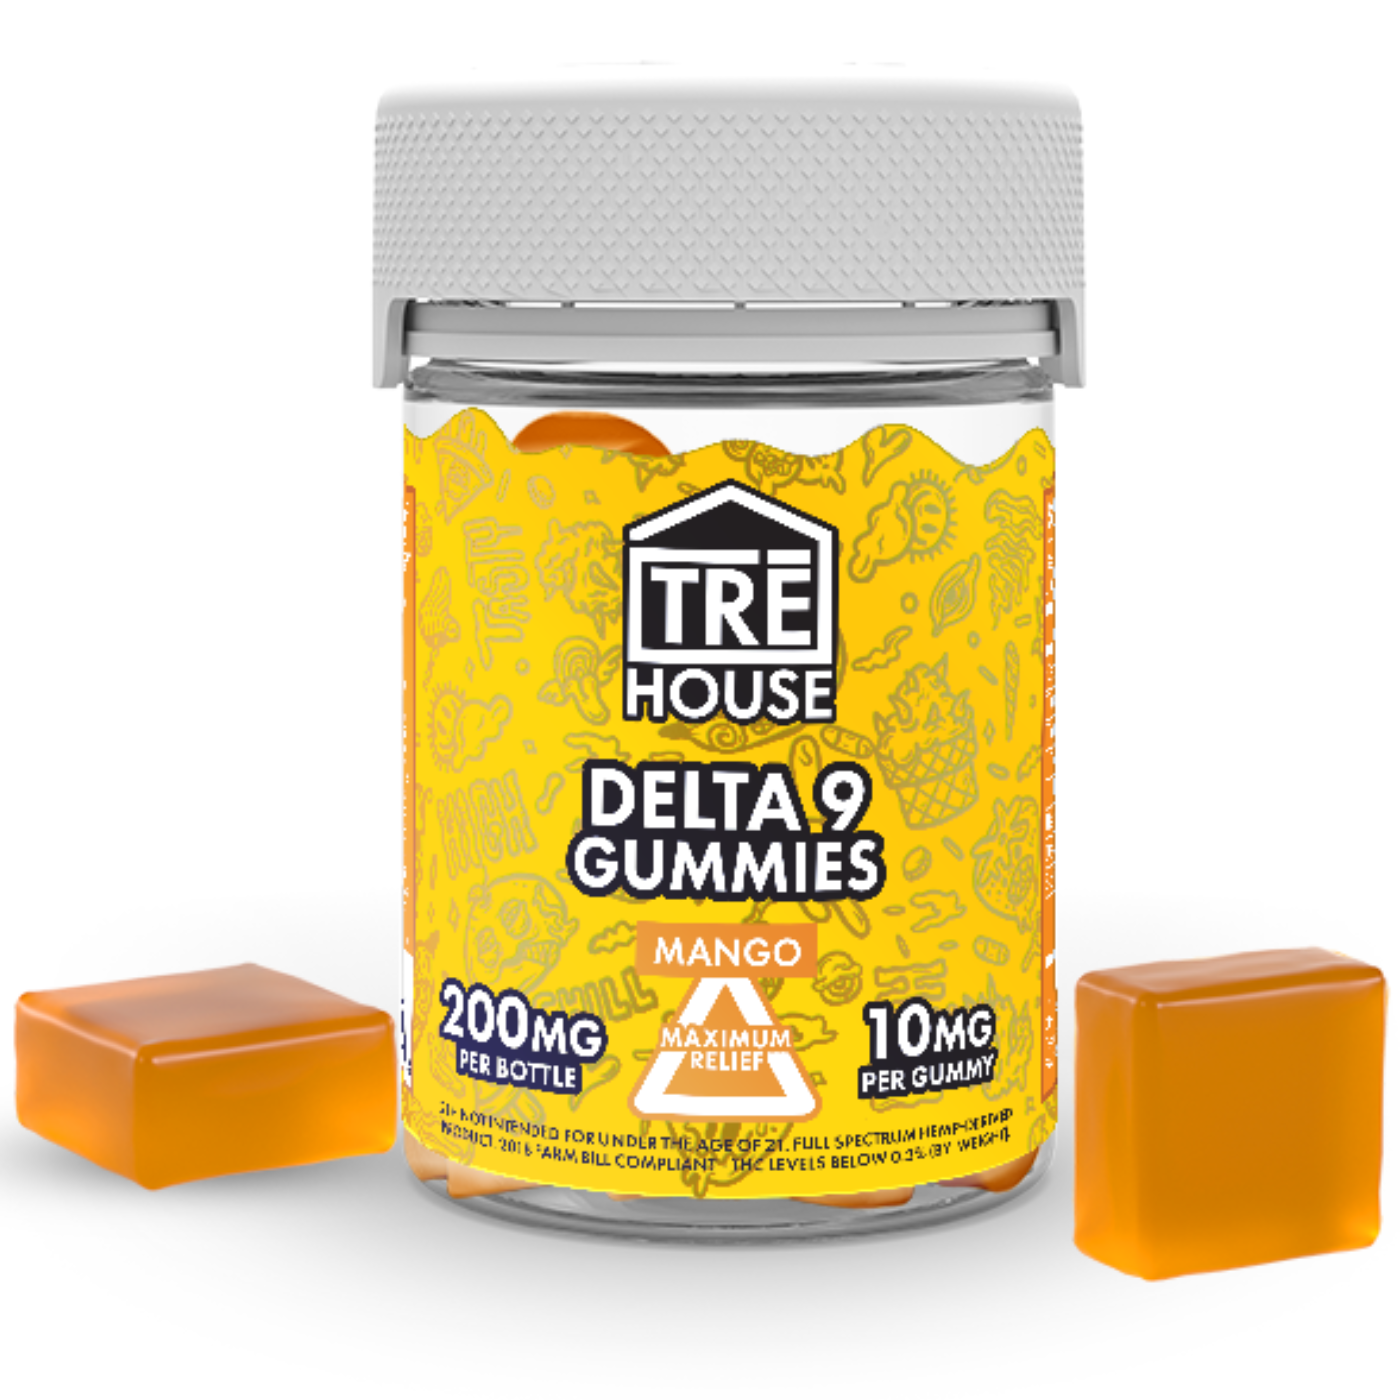 This image is advertising a bottle of gummies containing 200mg of mango-flavored hemp extract, with 10mg per gummy for maximum relief, and is not intended for those under the age of 21